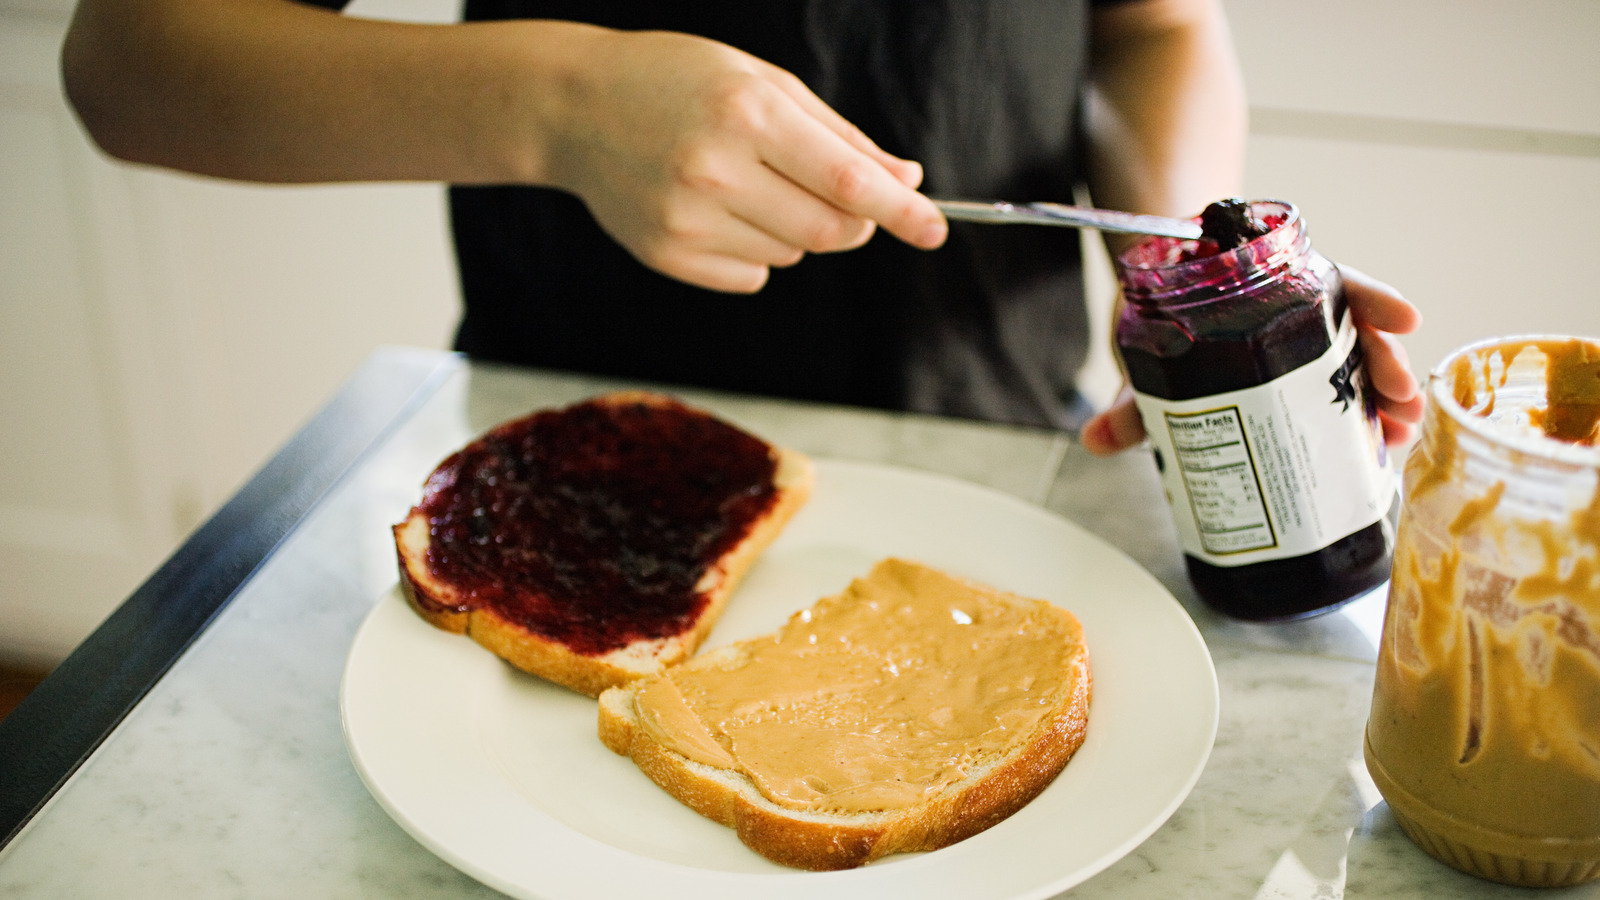 Genius Ways To Make Your Peanut Butter And Jelly Sandwich Healthier – Health Digest